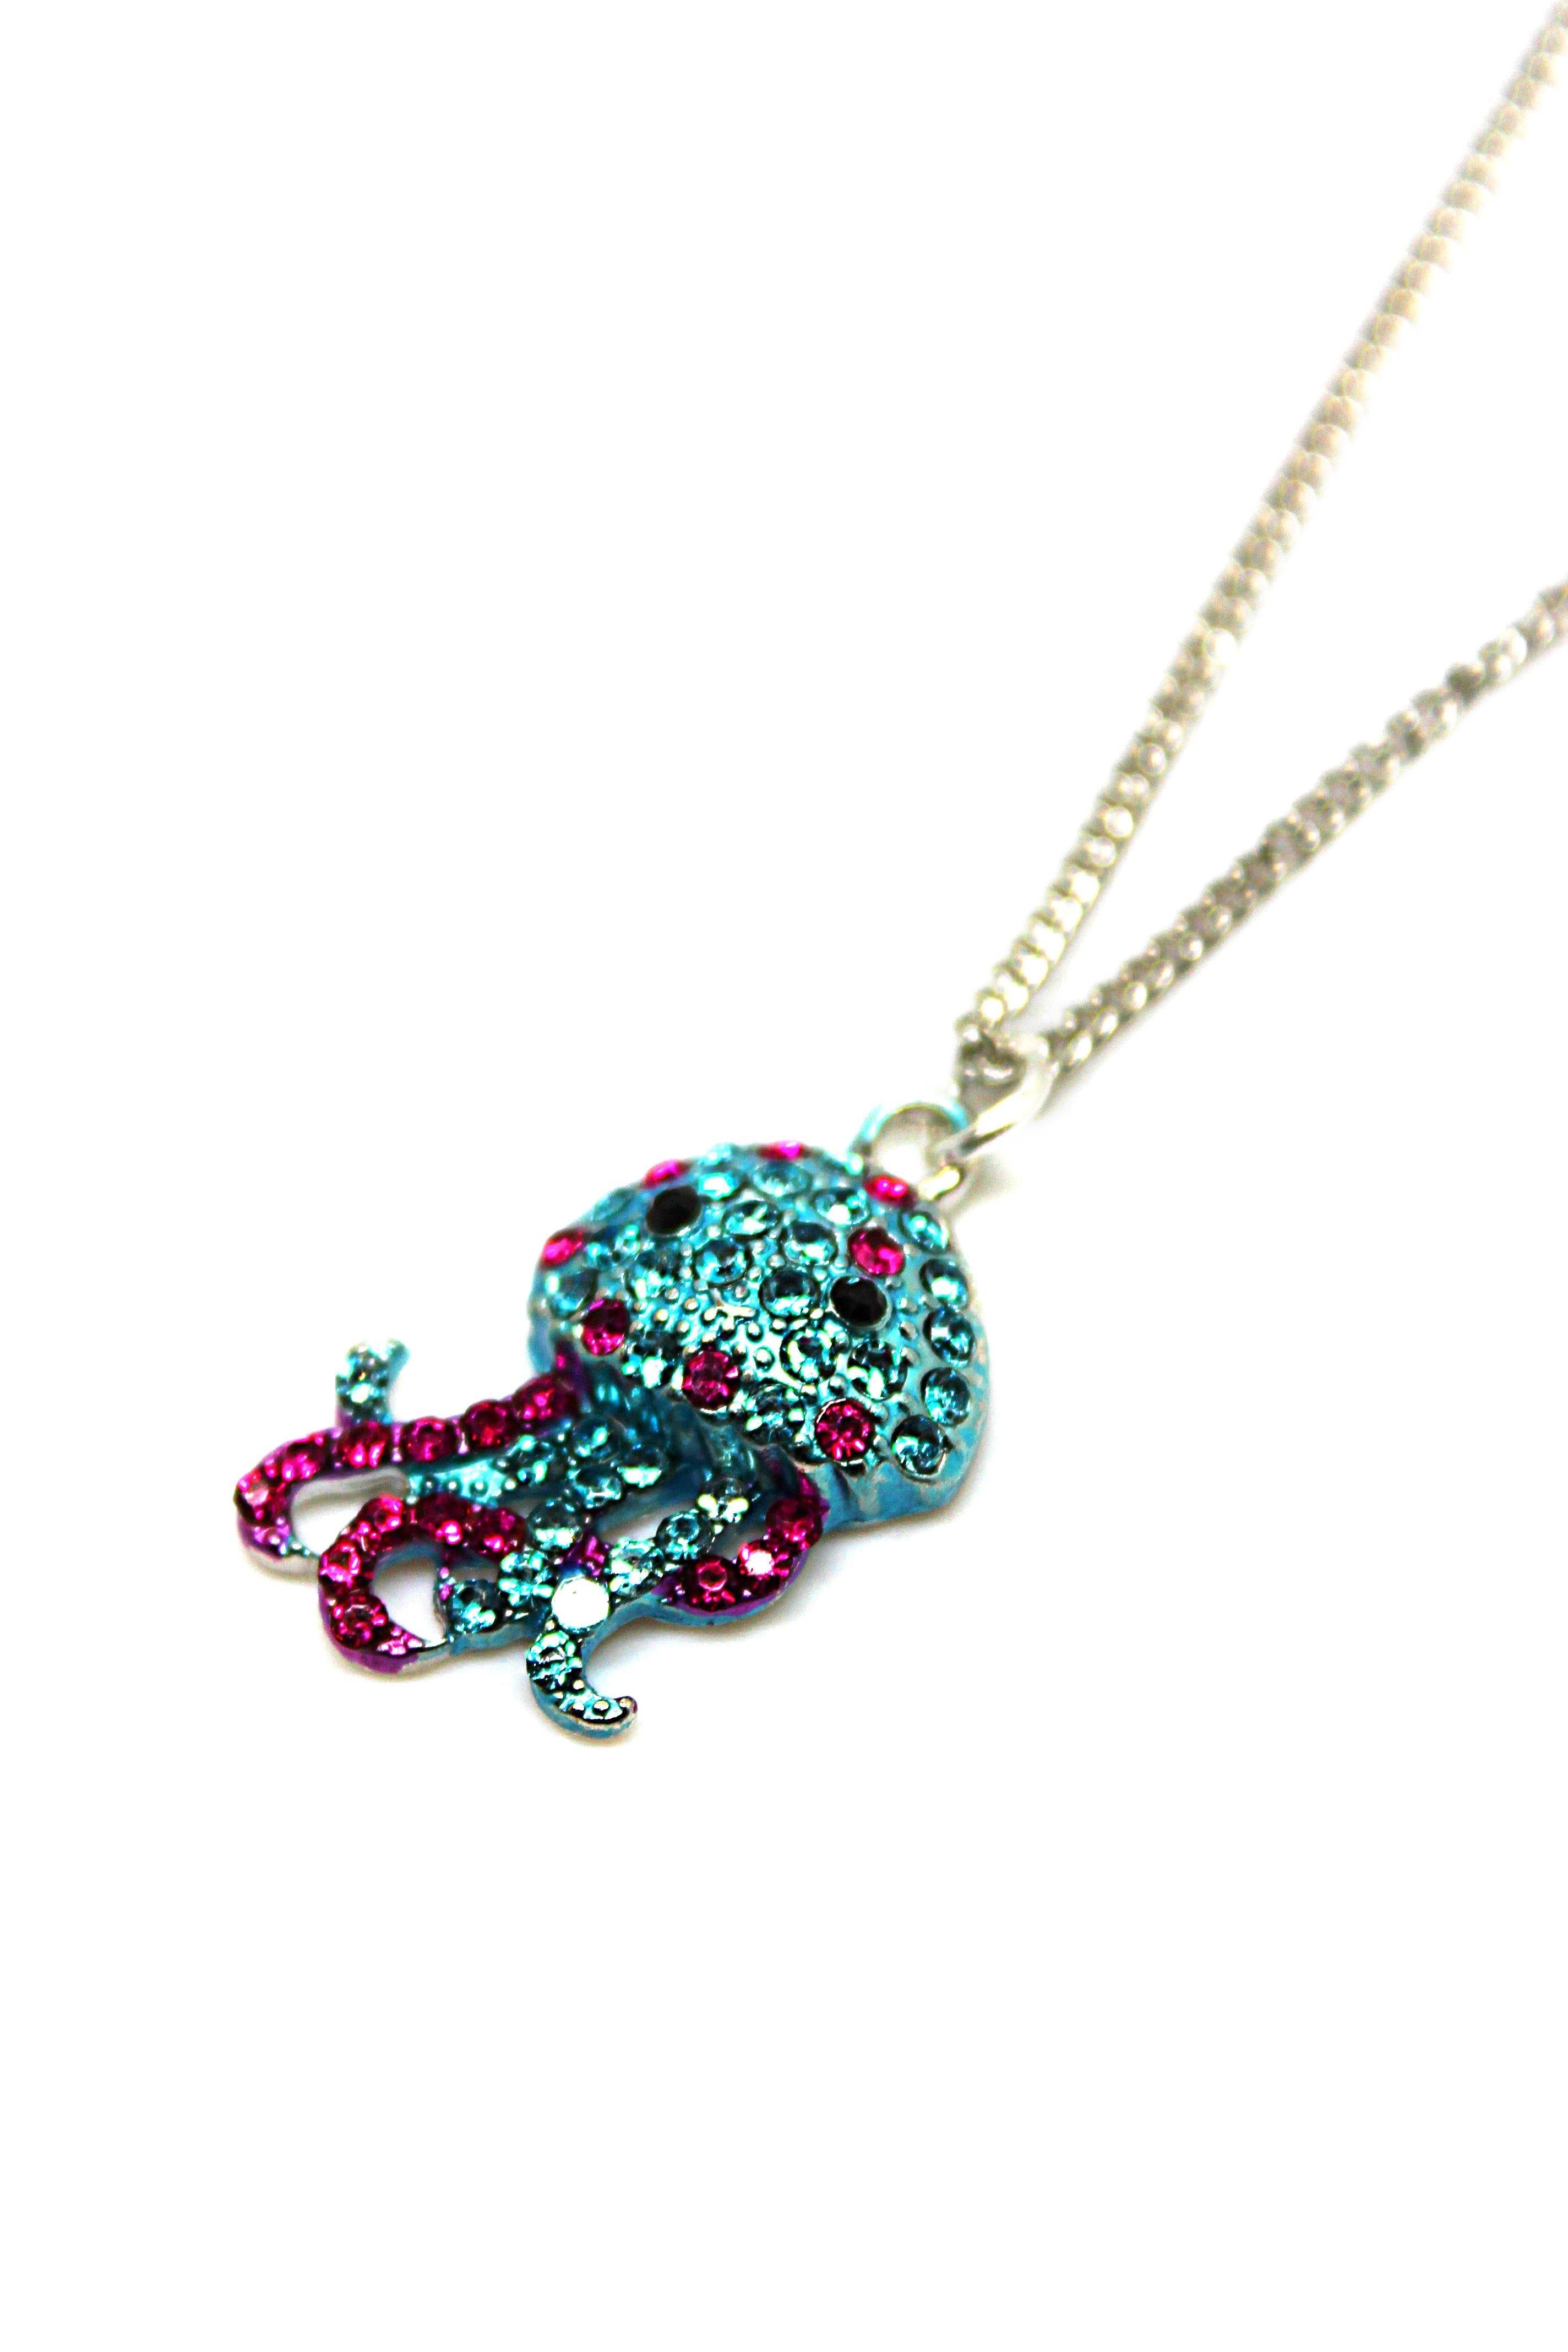 Jelly Fish Blue Necklace - Wildtouch - Wildtouch